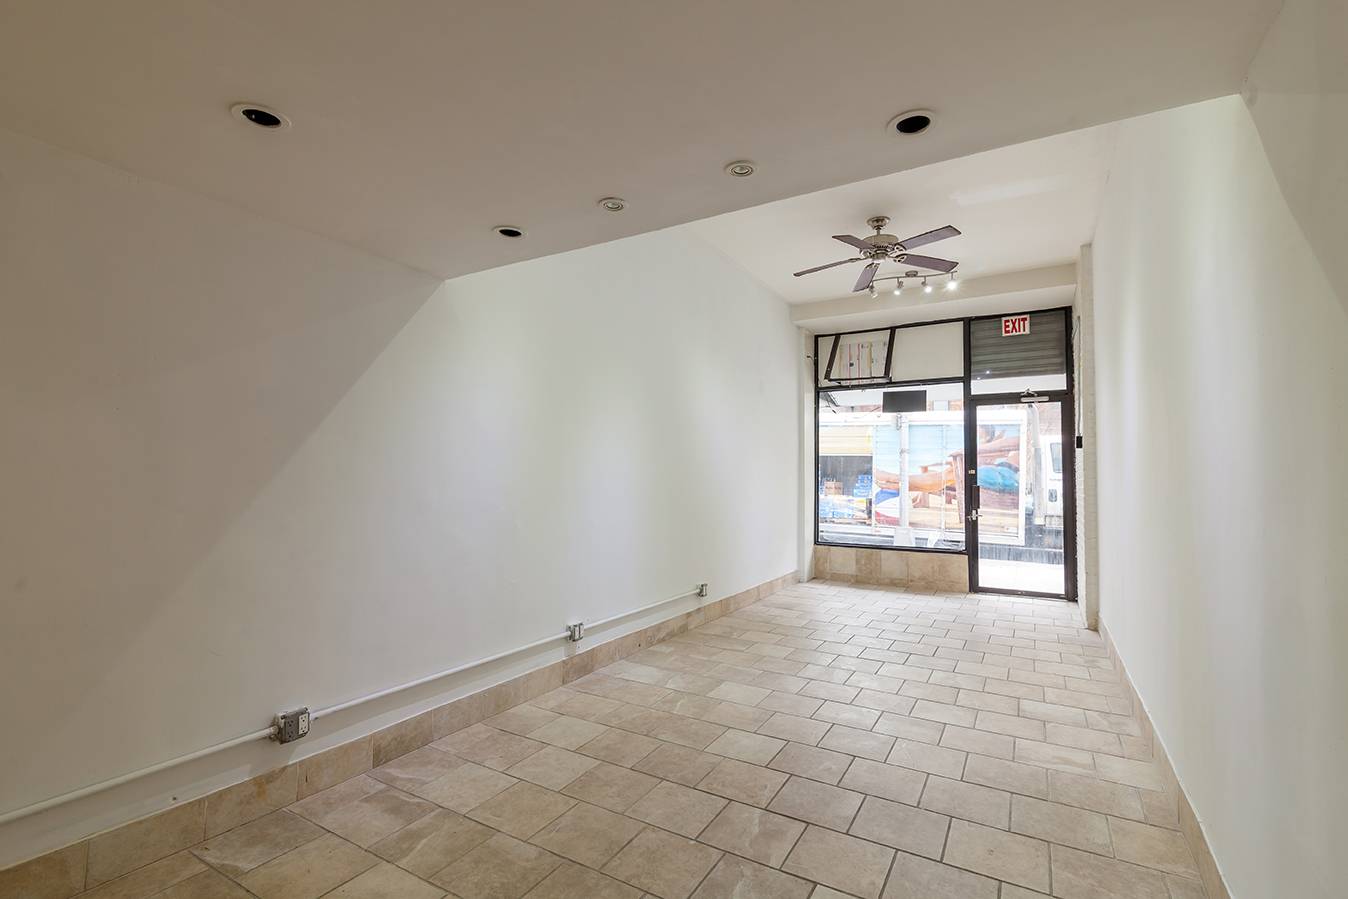 Astoria/LIC: Ground Floor Retail Space For Lease - All Uses Considered